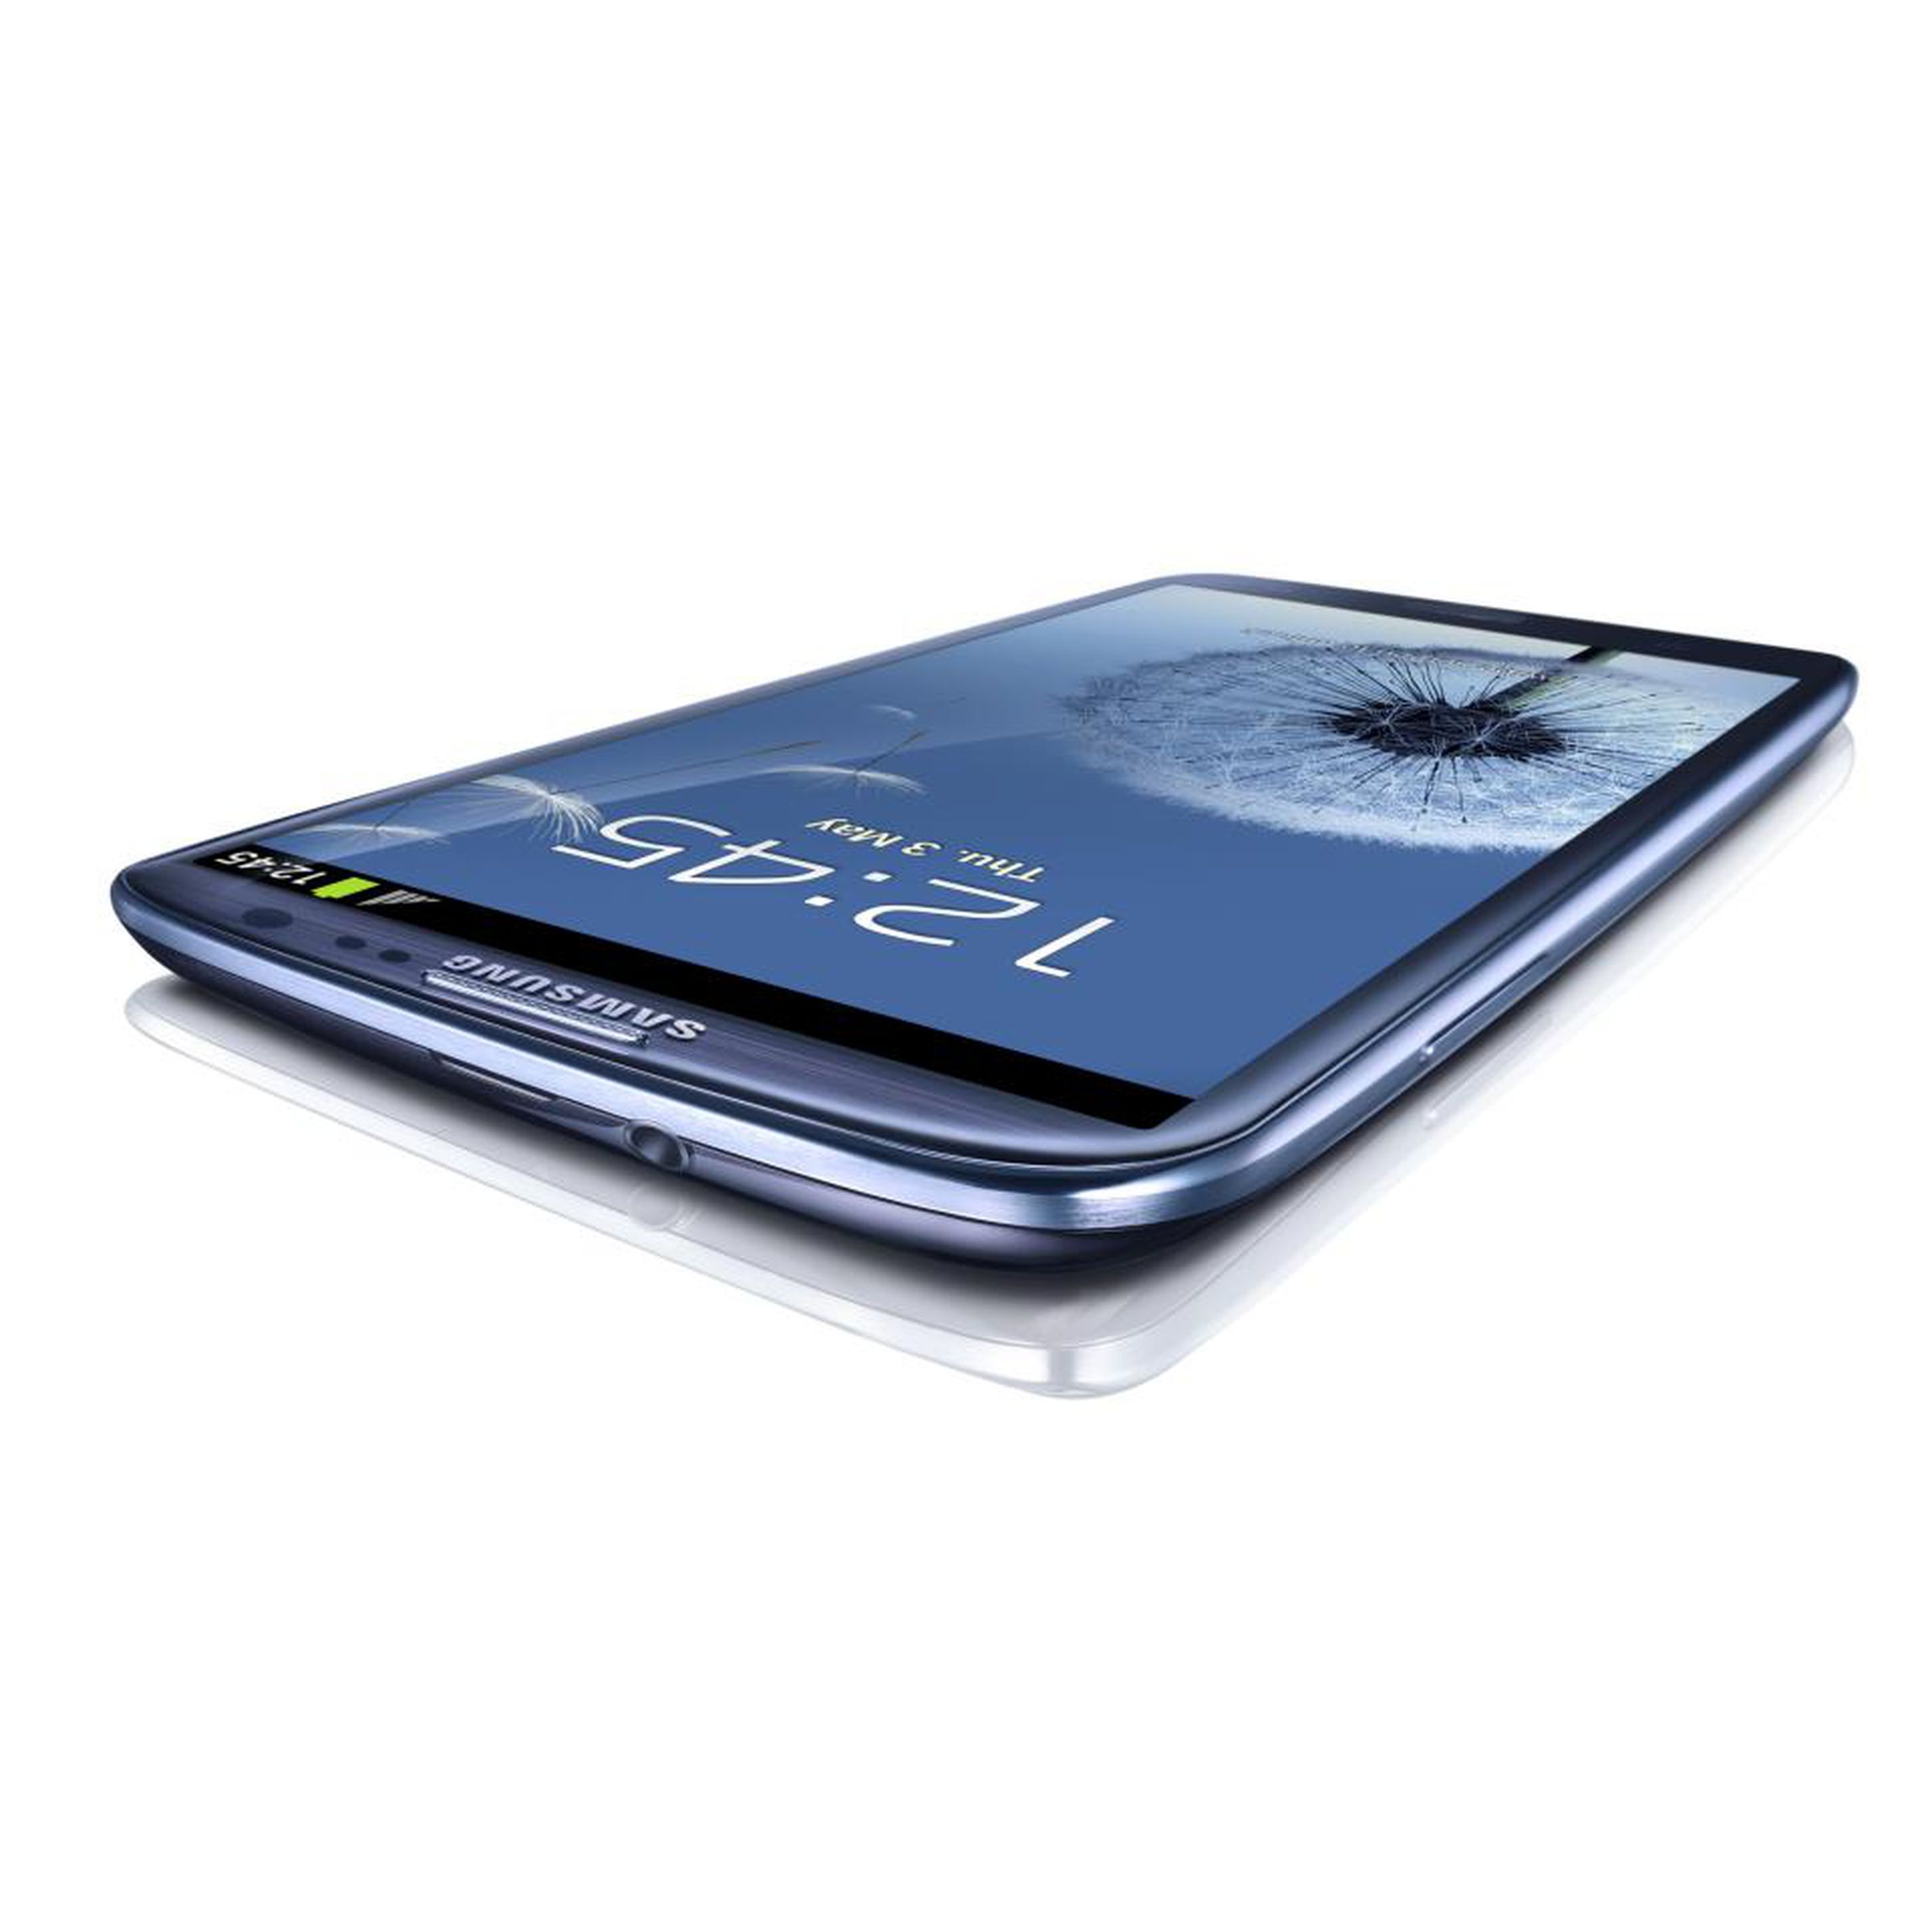 Samsung Galaxy S III press pictures 